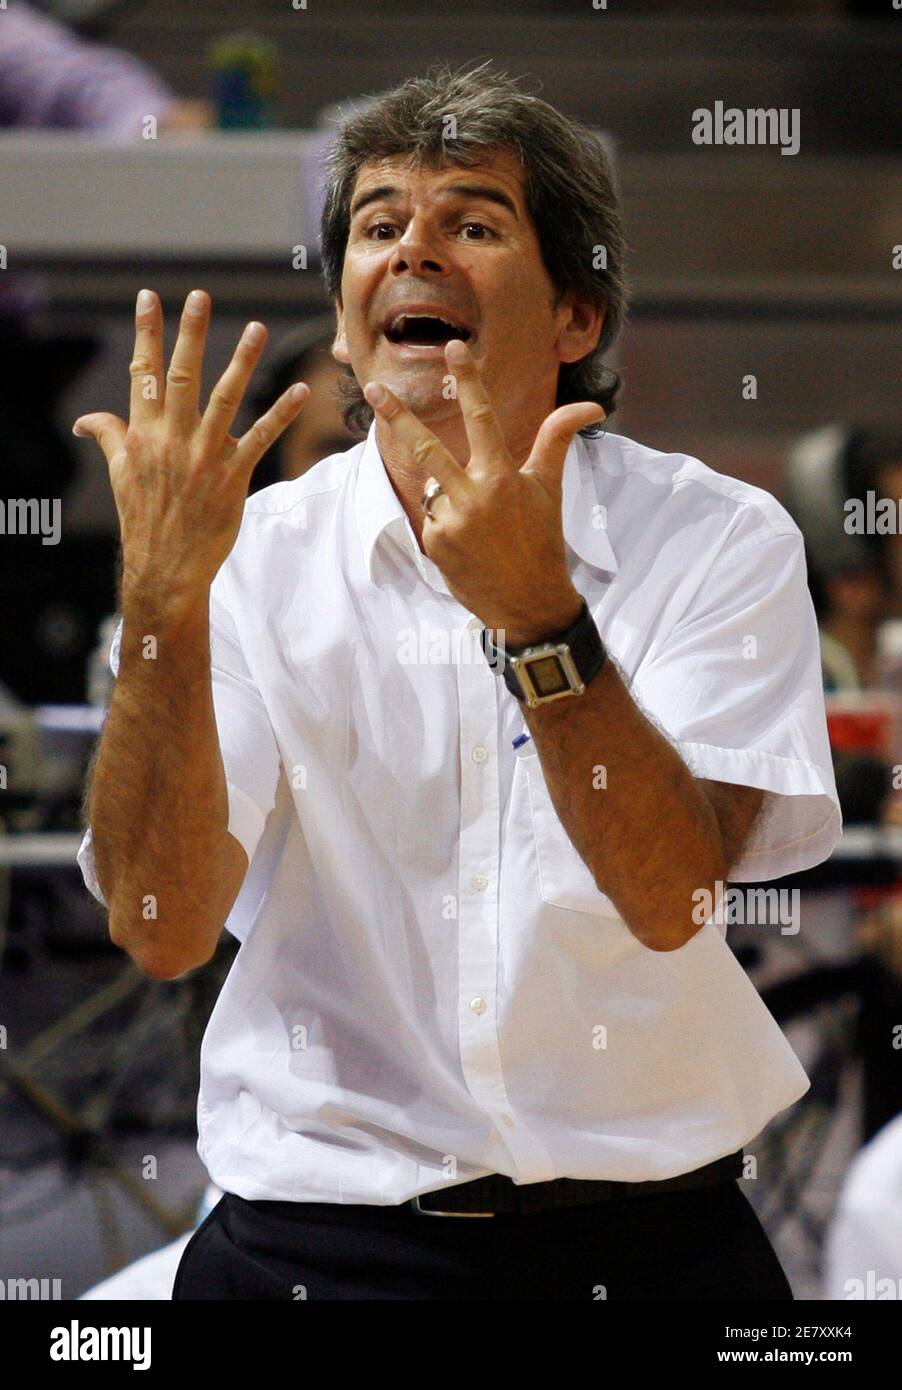 France's coach Claude Bergeaud gestures during their second round basketball game against Lithuania at the European Championships in Madrid September 10, 2007. REUTERS/Ivan Milutinovic (SPAIN) Stock Photo